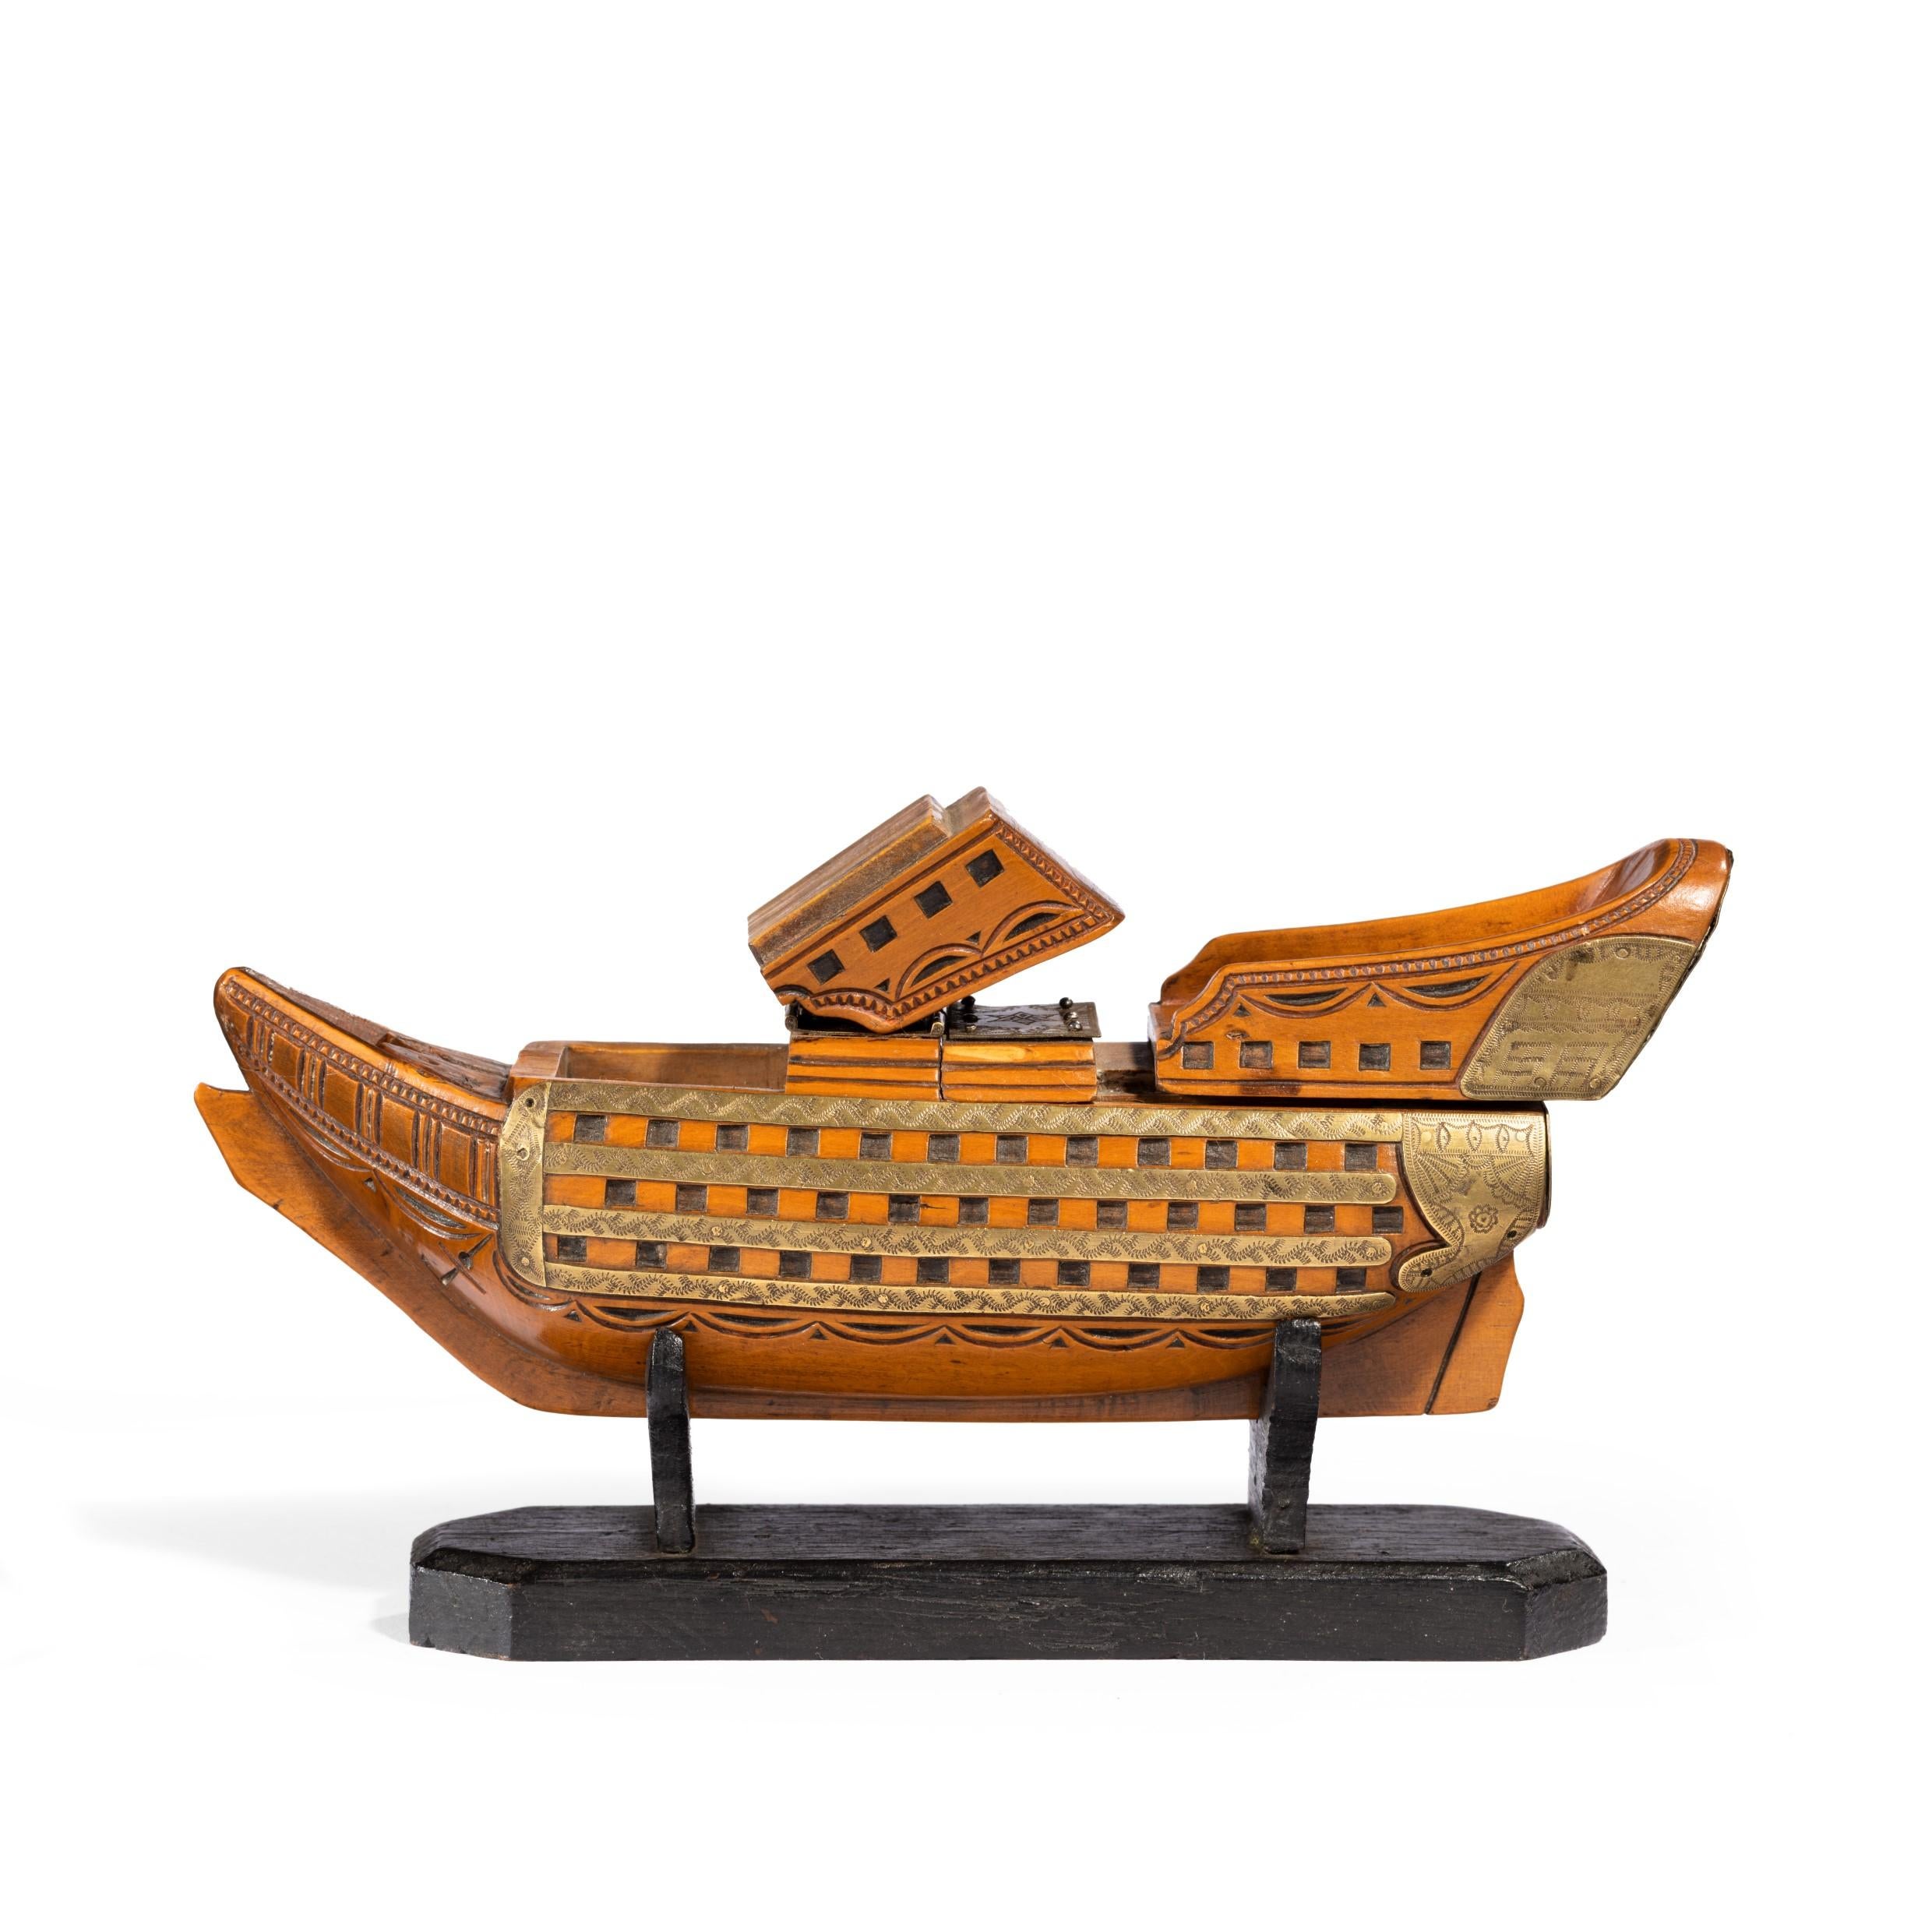 This double snuffbox shows a French Océan-class battleship. Constructed of walnut, the hinged bow and the poop sections opening to reveal compartments in her mid-ships and applied with incised brass bands below the gun ports and around the stern,